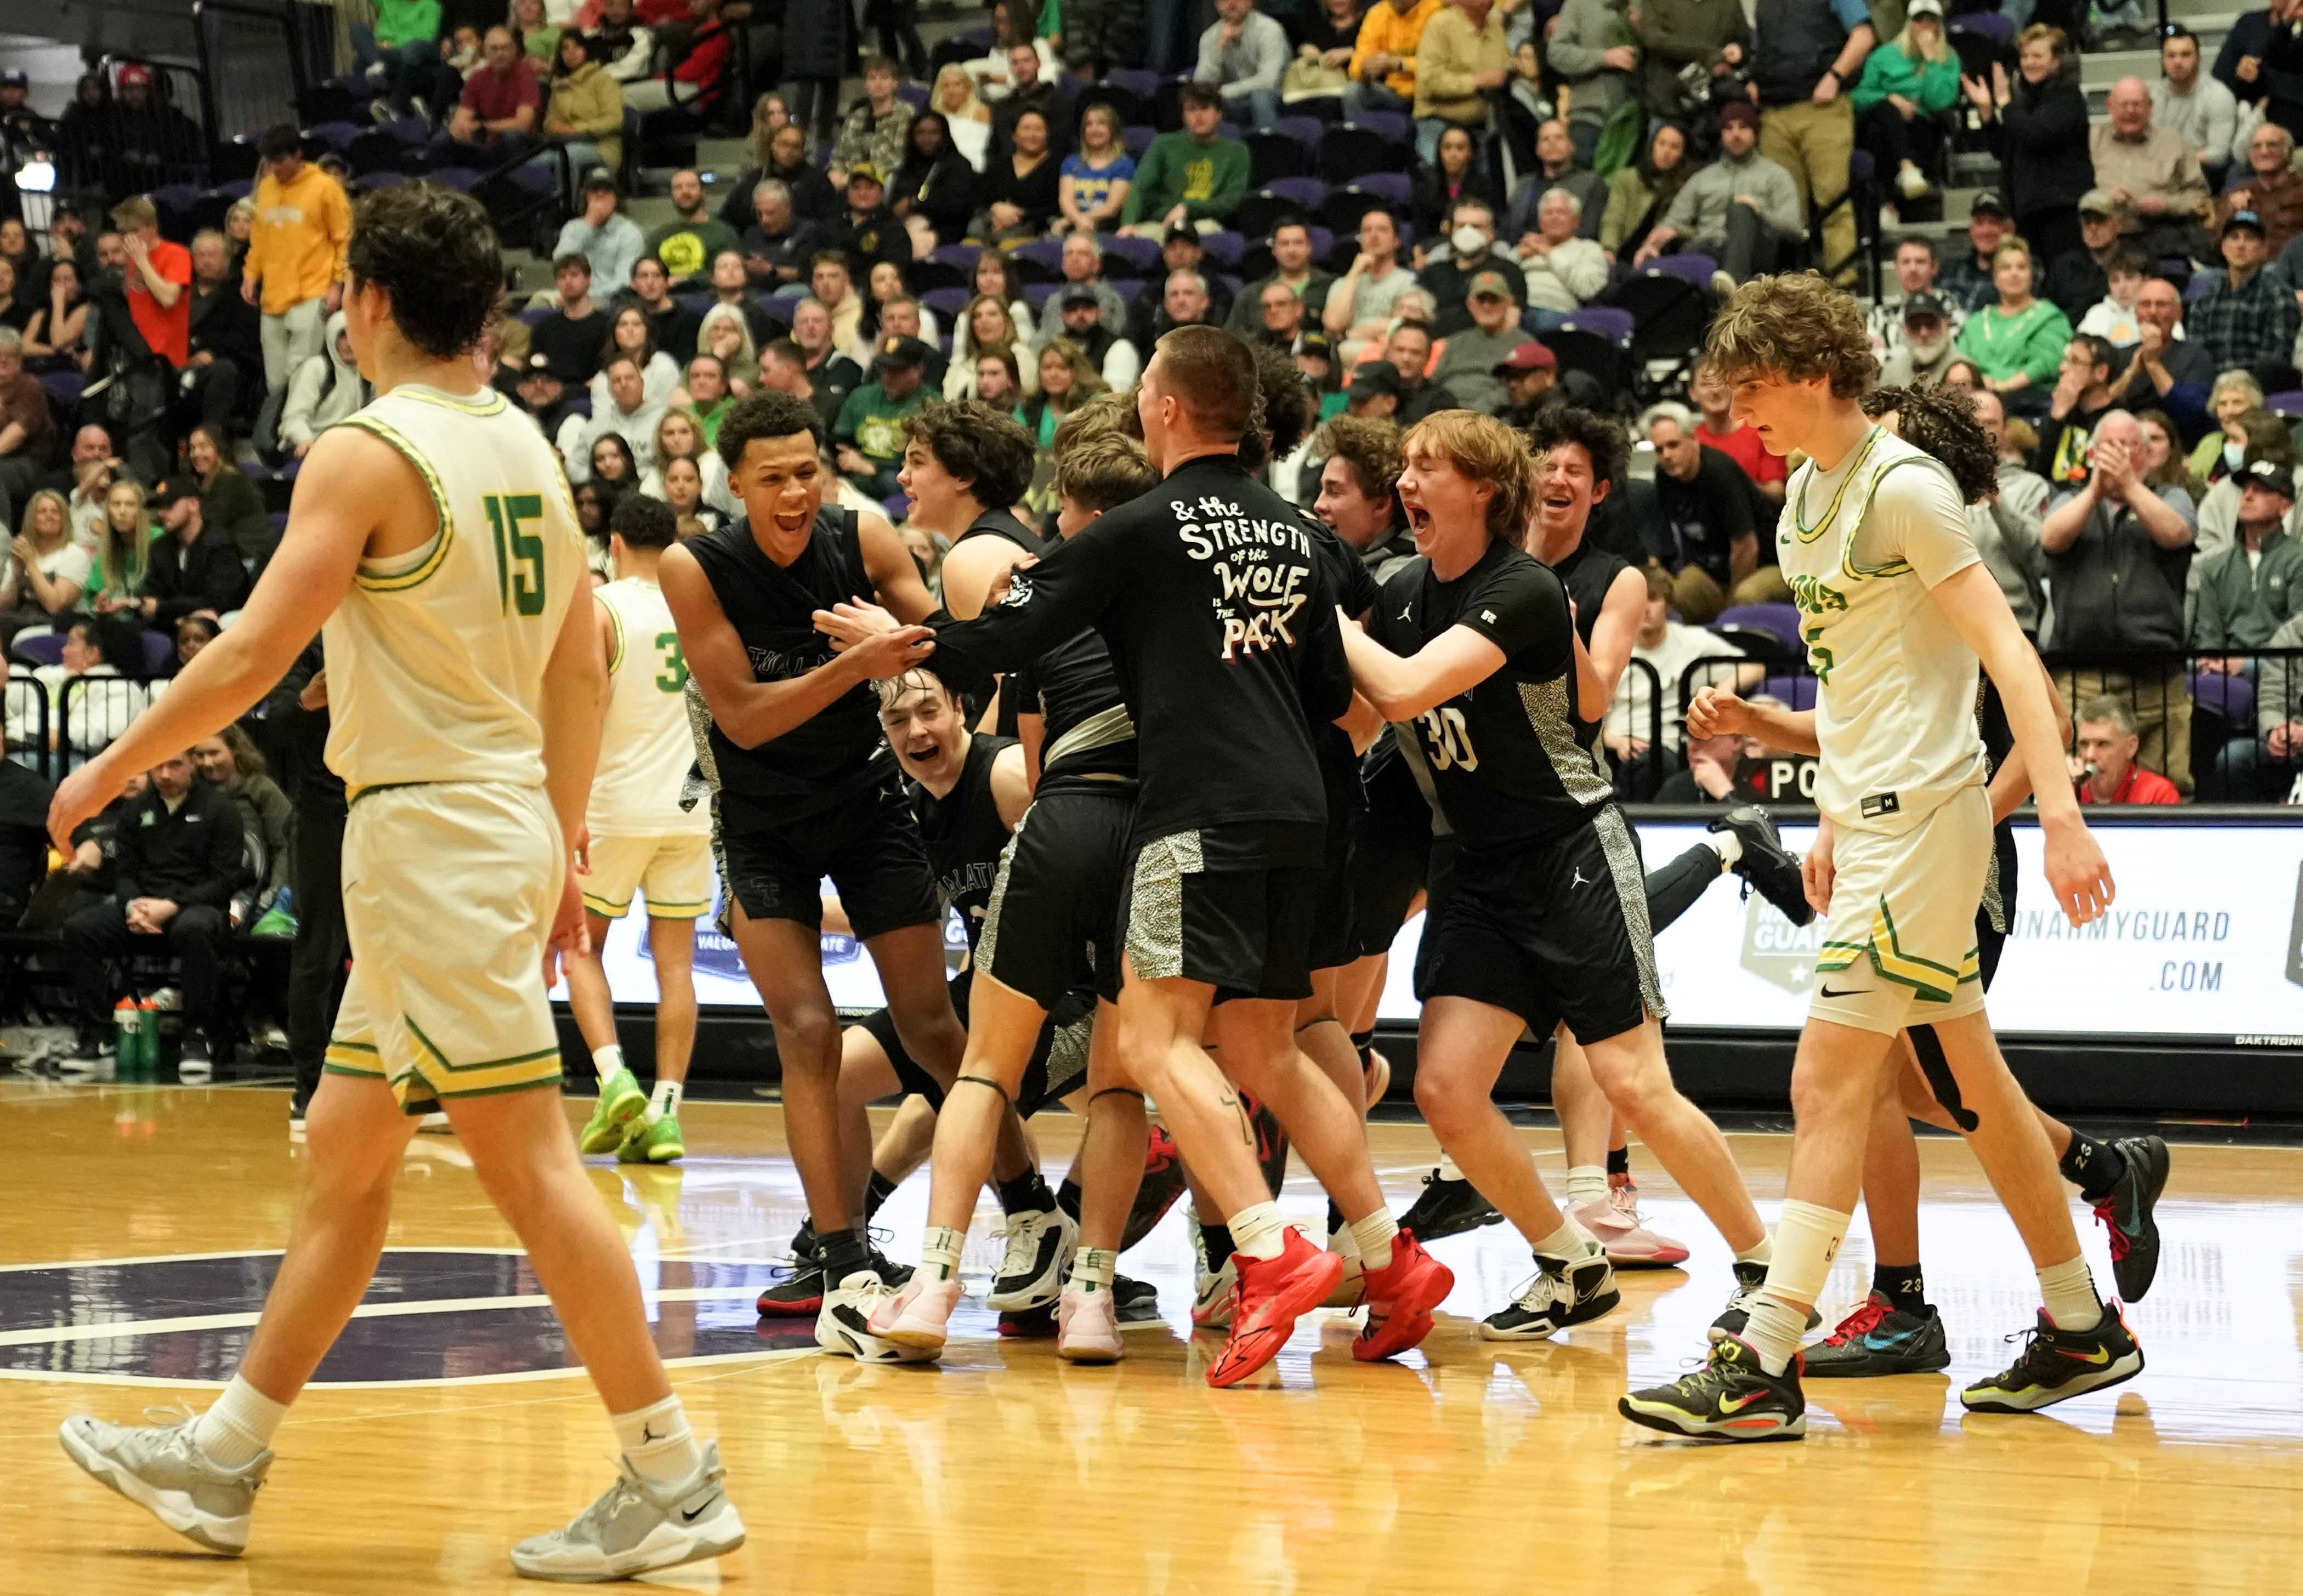 Tualatin players celebrate after upsetting top-seeded West Linn in the 6A boys basketball final Saturday. (Photo by Jon Olson)